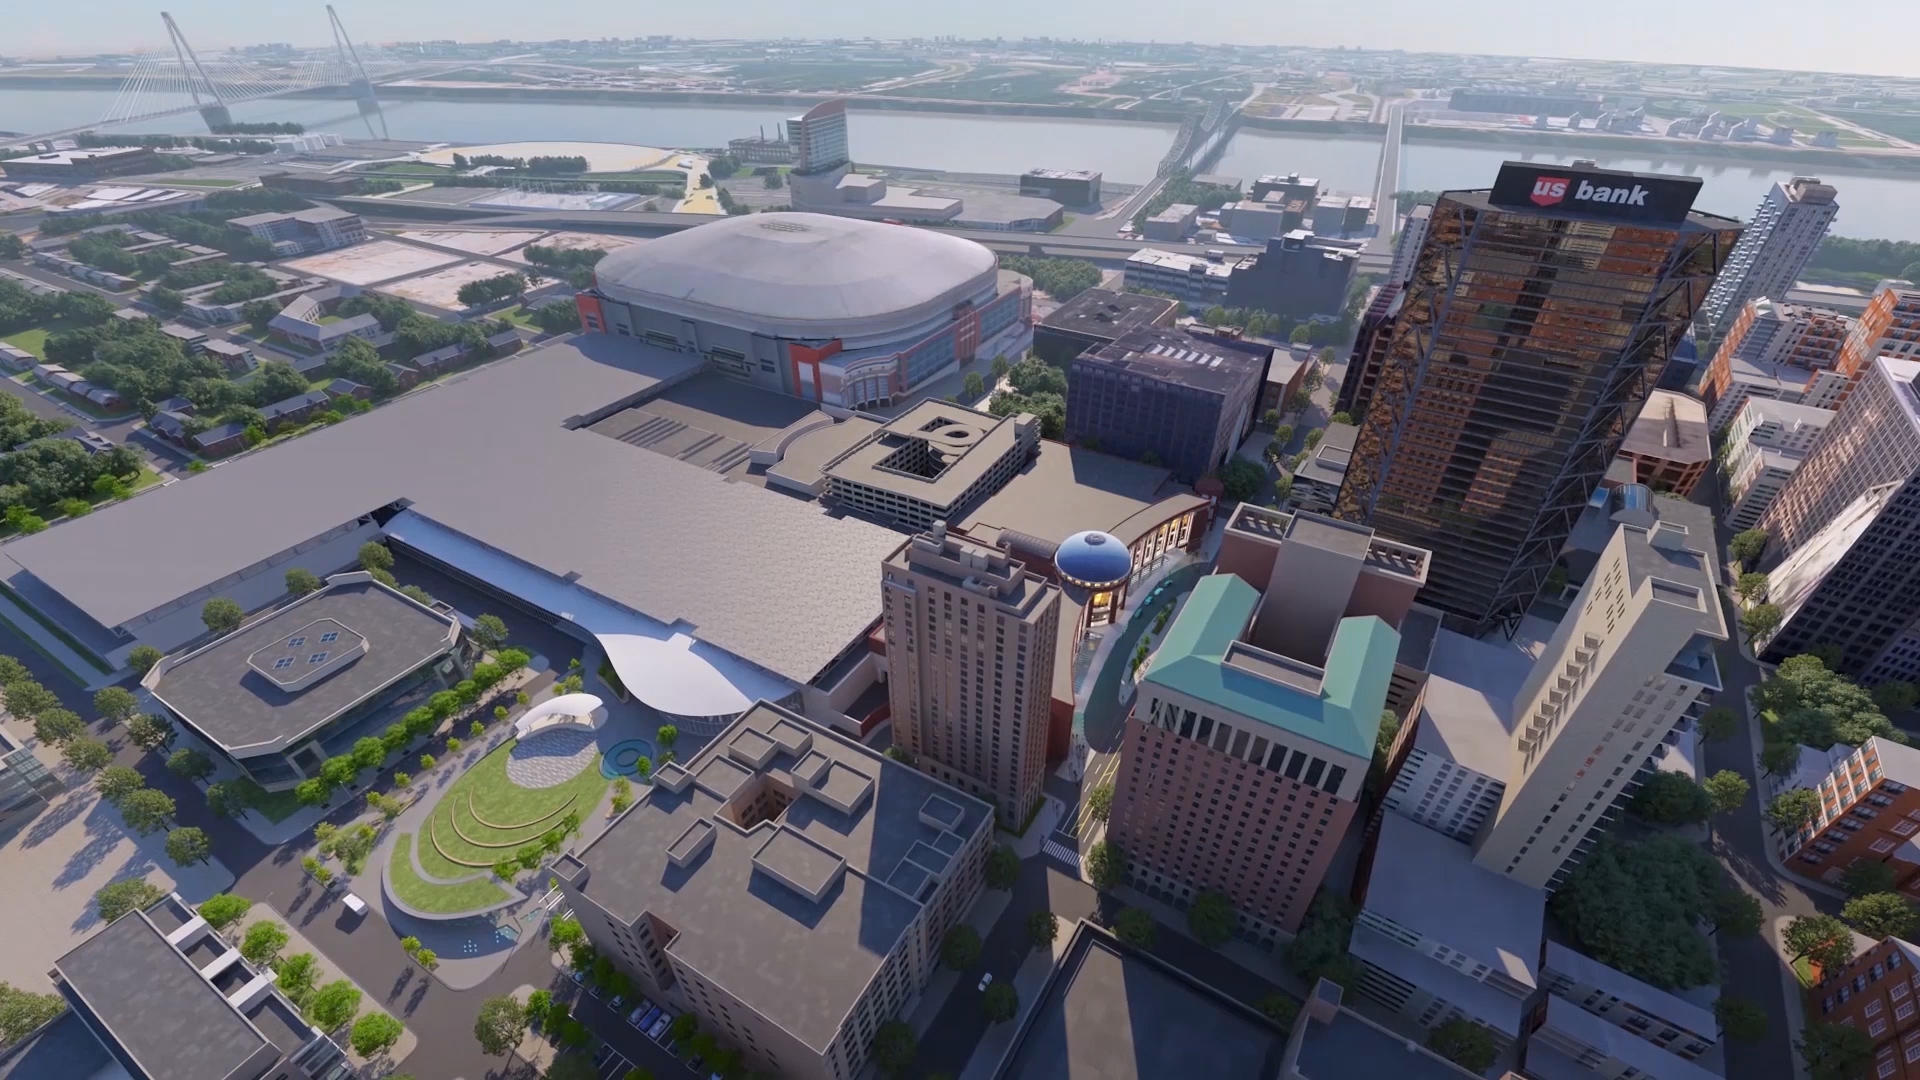 Backers Of Proposed $175 Million Convention-Center Upgrade Hope To Sustain, Grow Regional ...